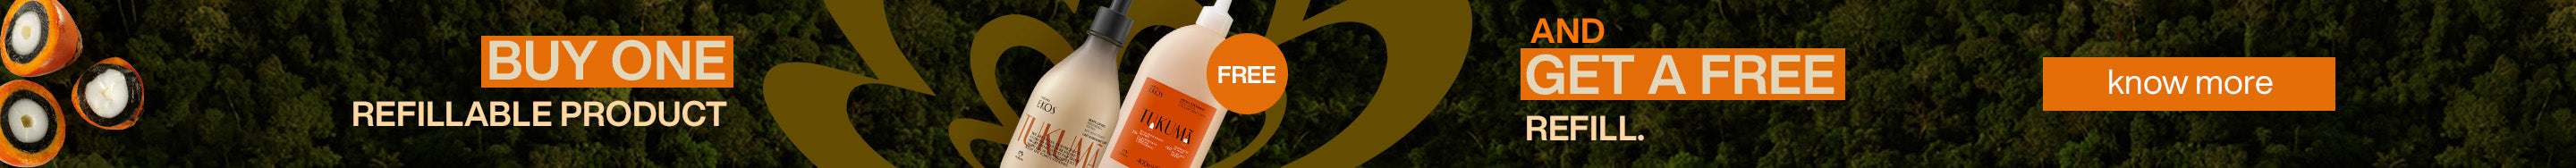 Natura Brasil | Buy One Refillable Item, Get a Free Refill